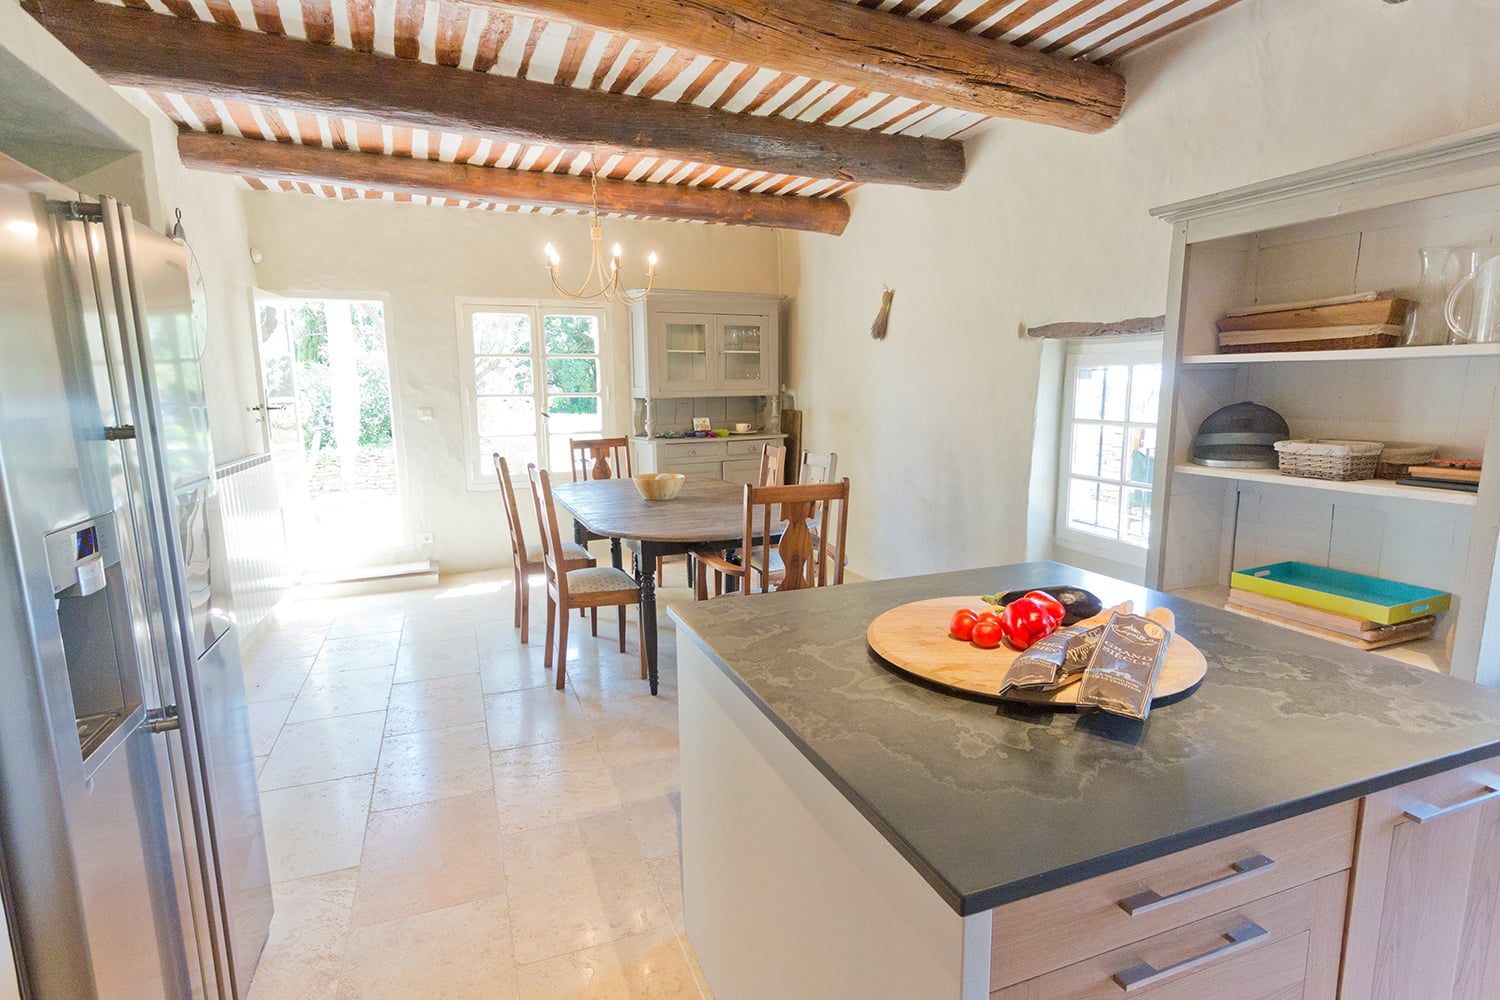 Kitchen | Self catering home in Provence